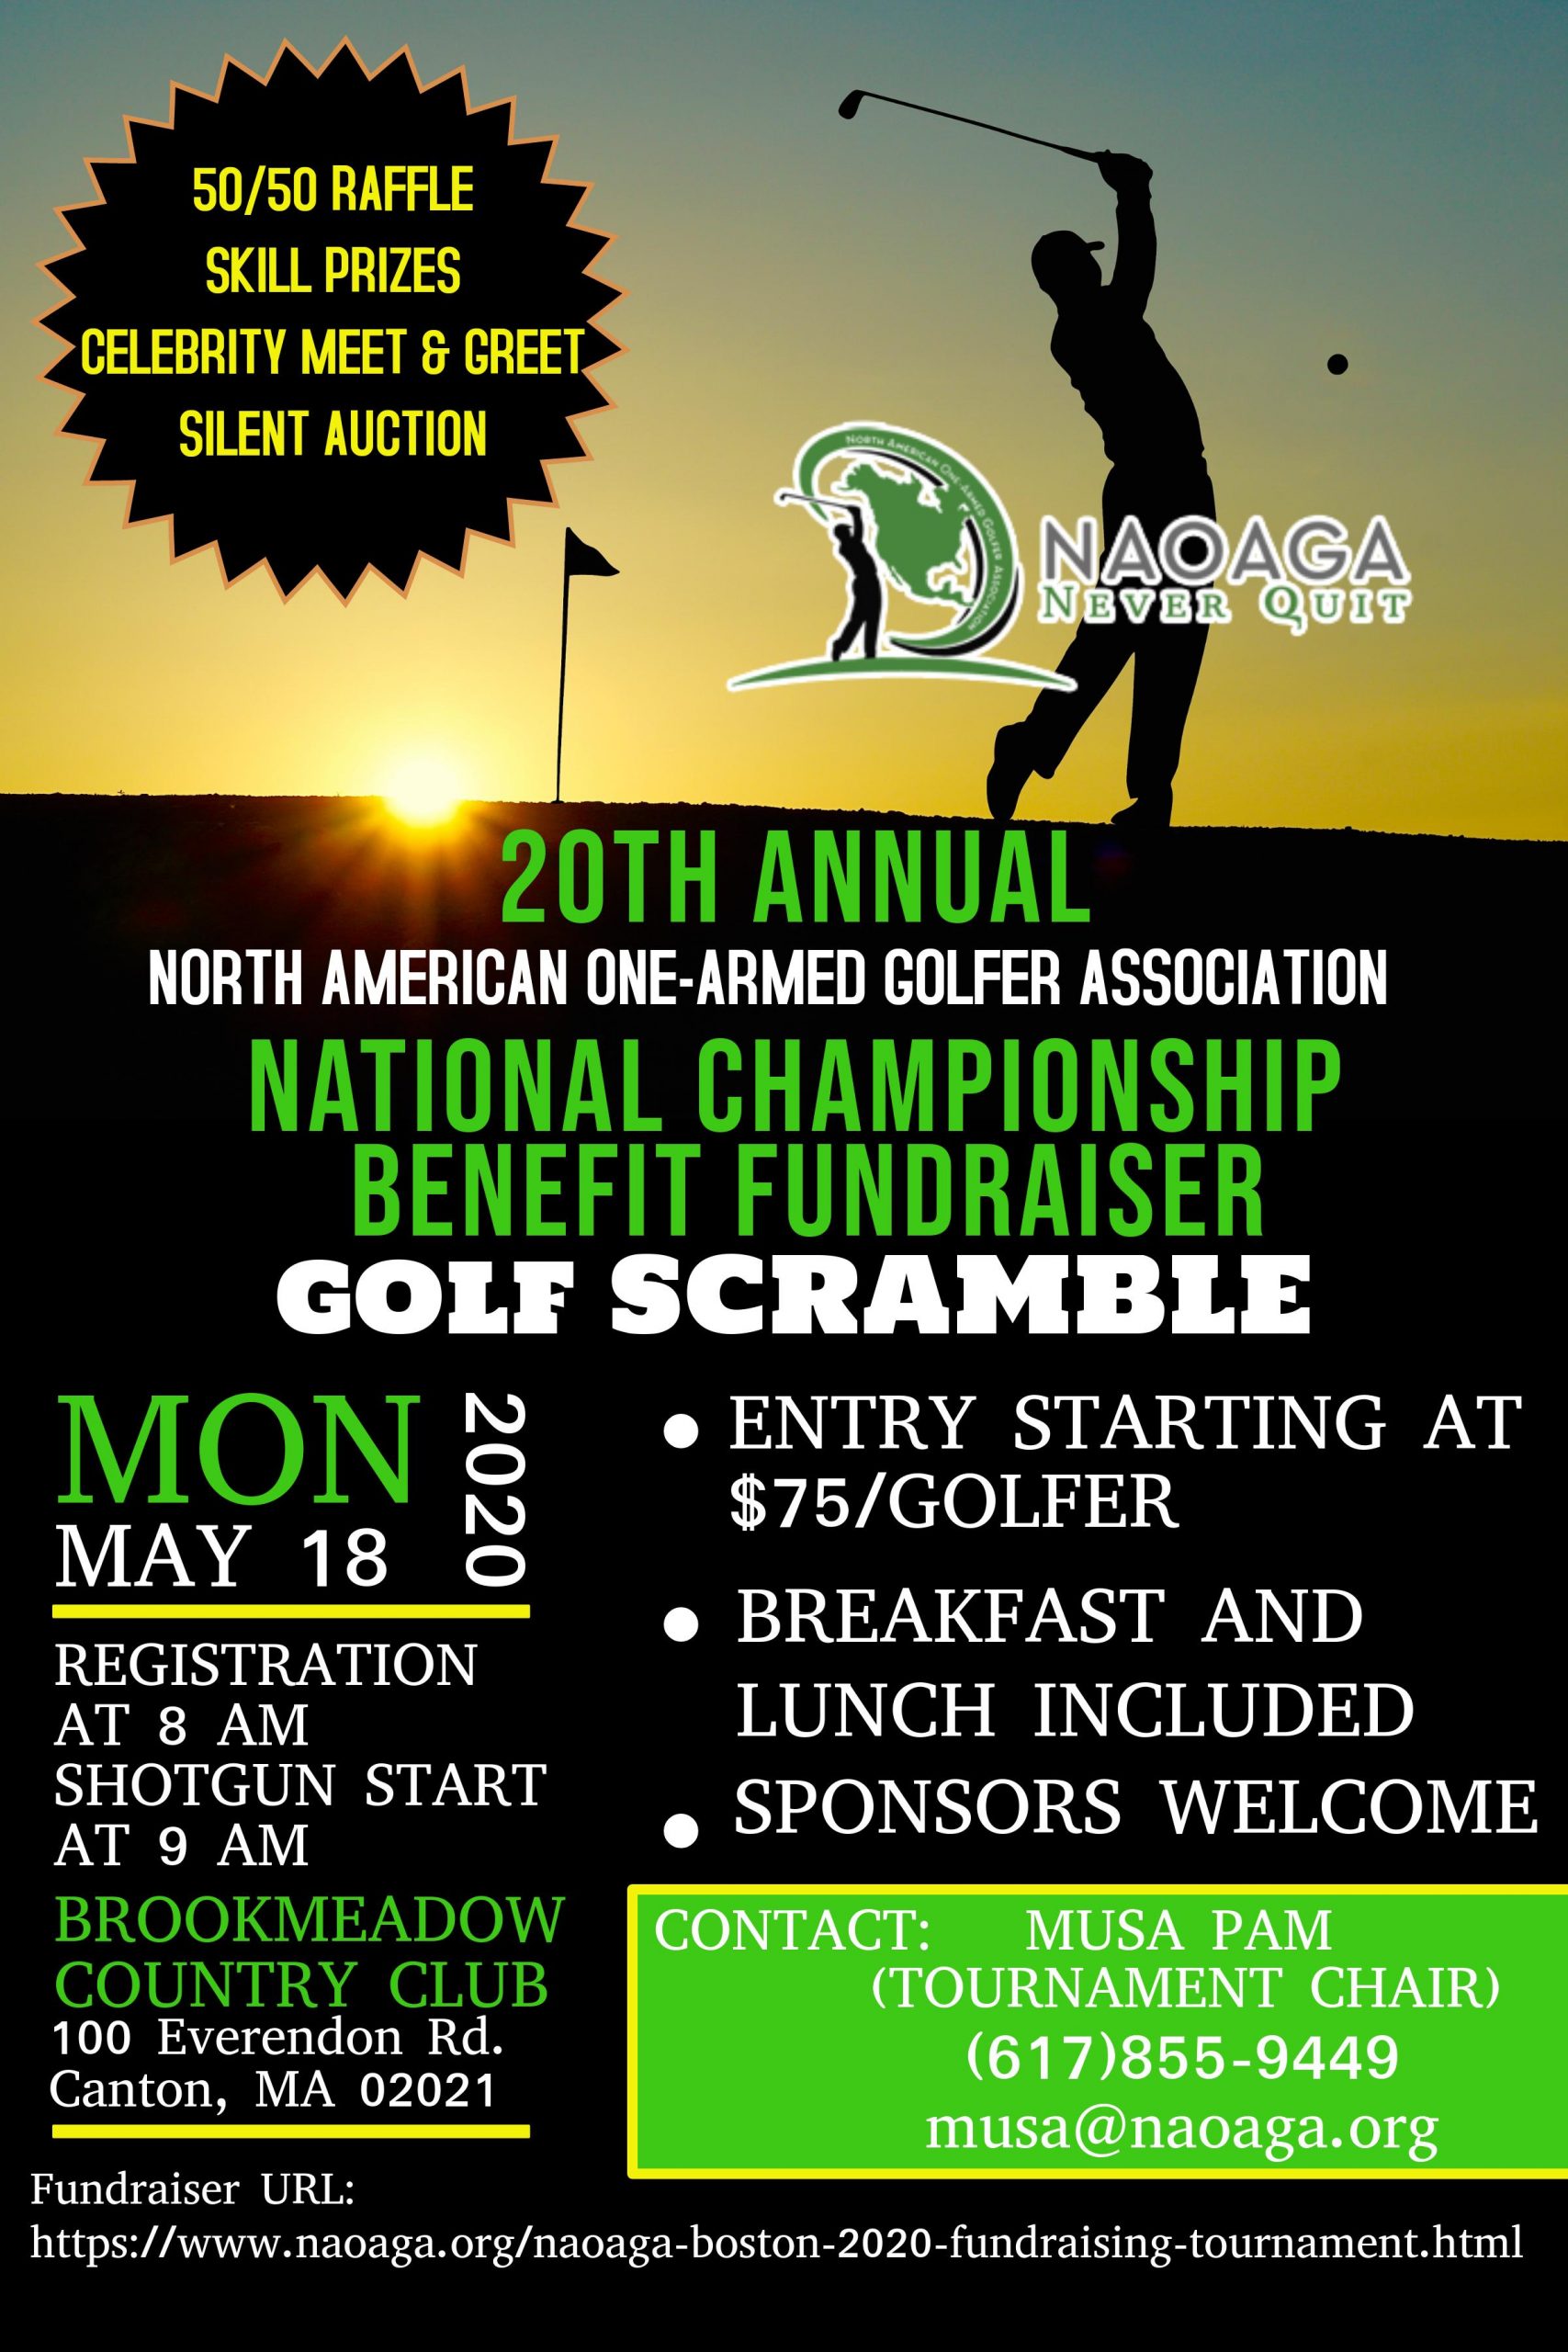 Golf Scramble Fundraising Tournament to Benefit Disabled One-Armed Golfers